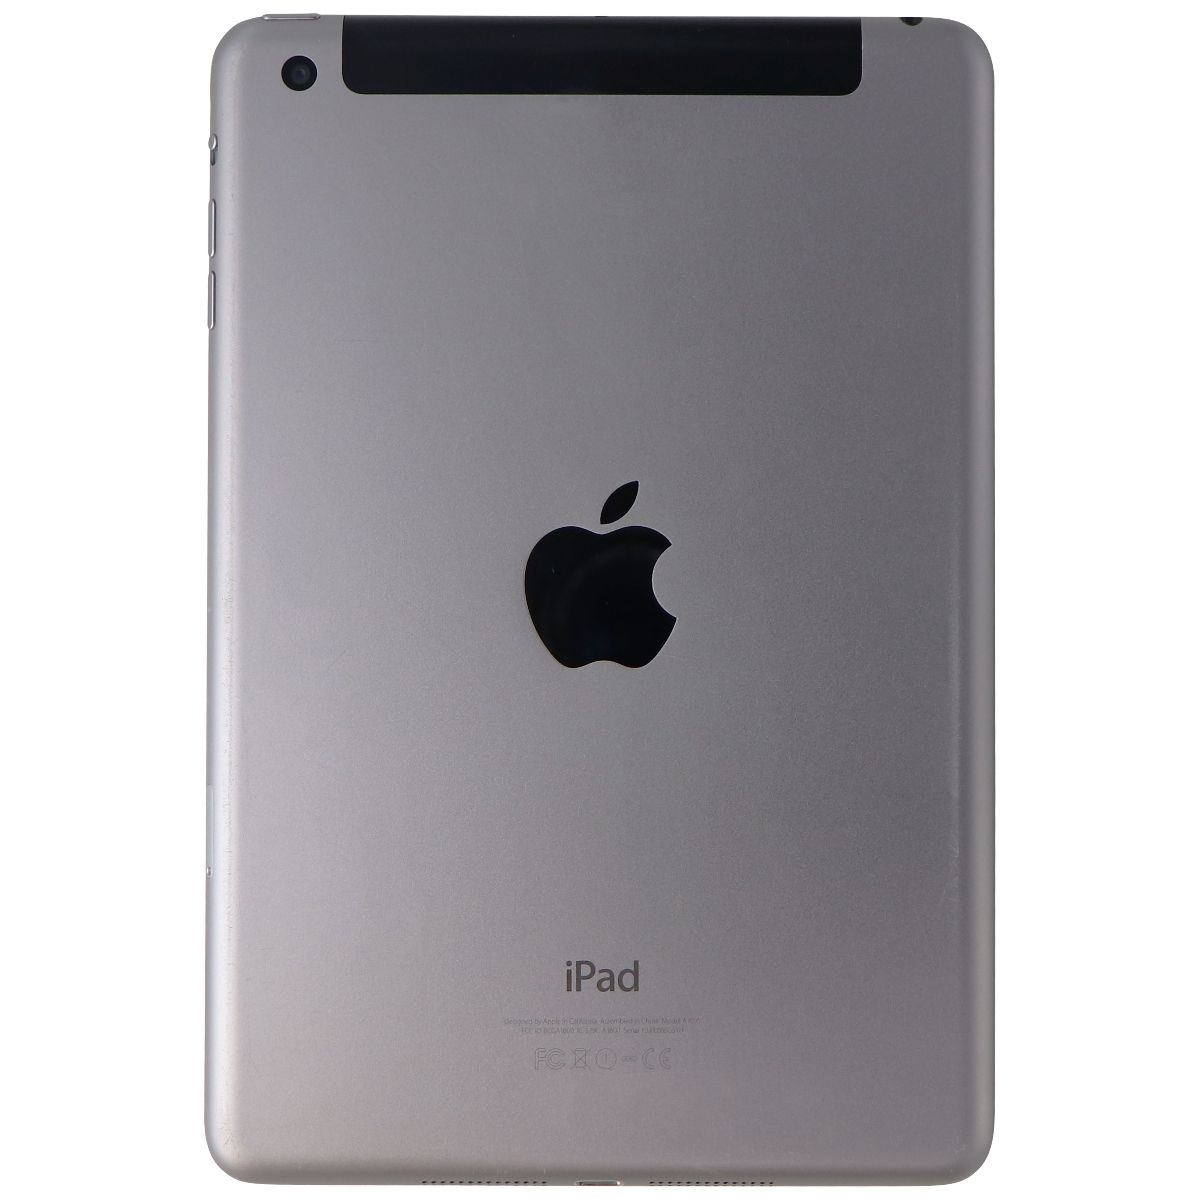 Apple iPad mini 3 (7.9-inch) Tablet (A1600) UNLOCKED - Space Gray / 128GB iPads, Tablets & eBook Readers Apple    - Simple Cell Bulk Wholesale Pricing - USA Seller